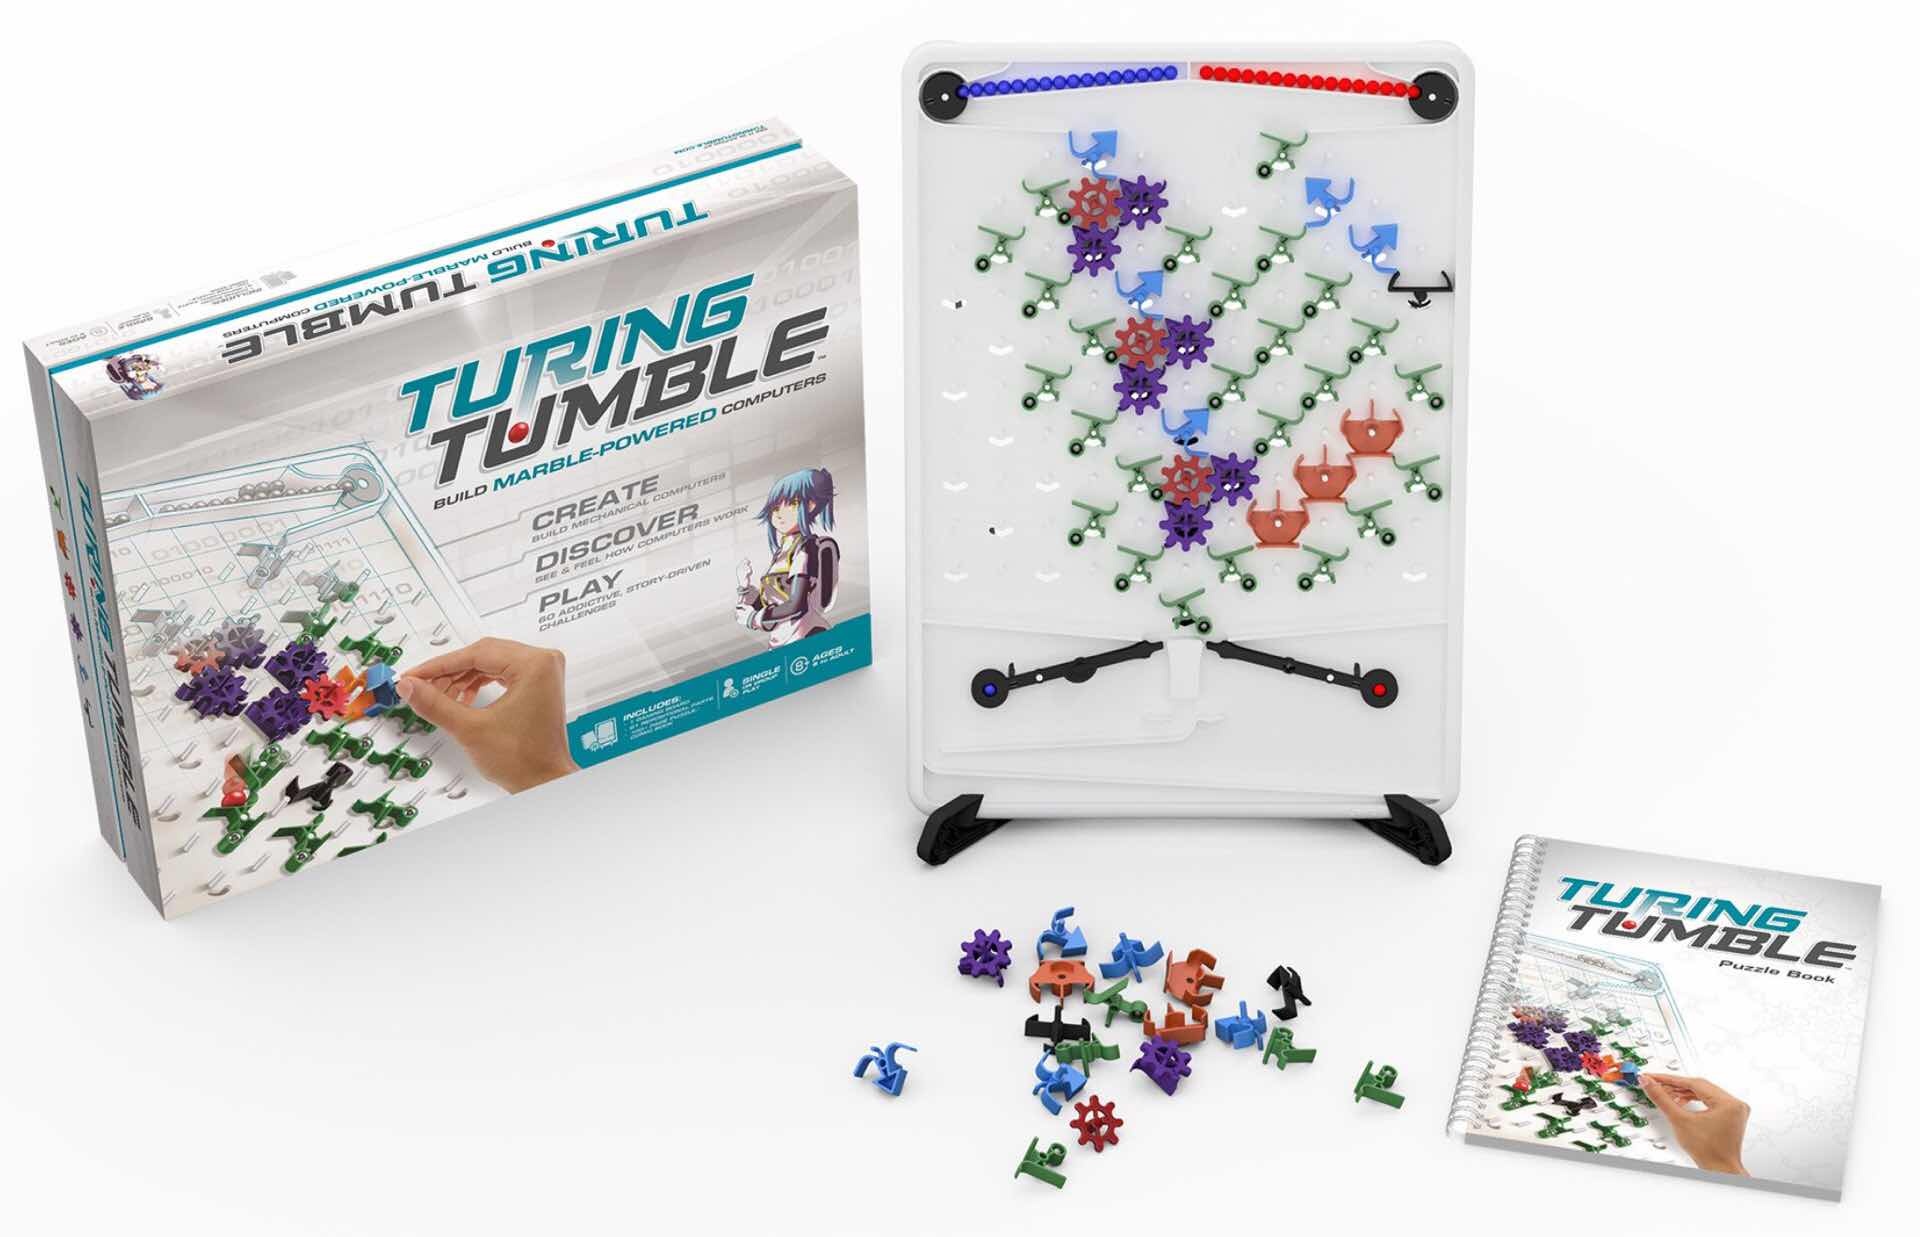 Turing Tumble: Build Marble-Powered Computers